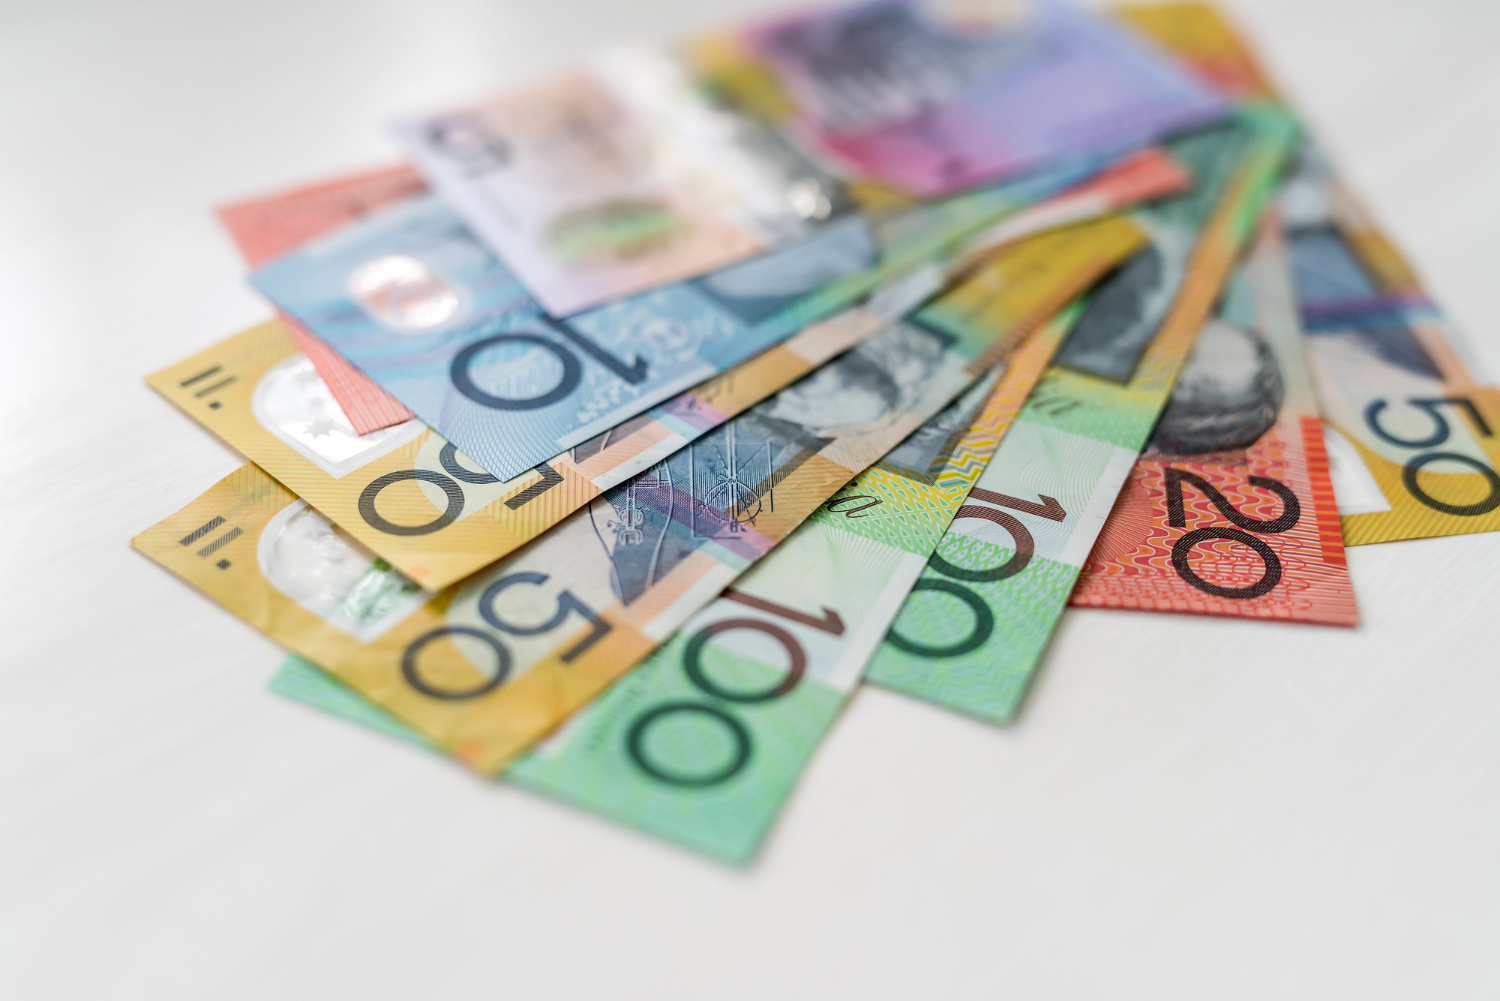 colorful australian dollars laying wooden table